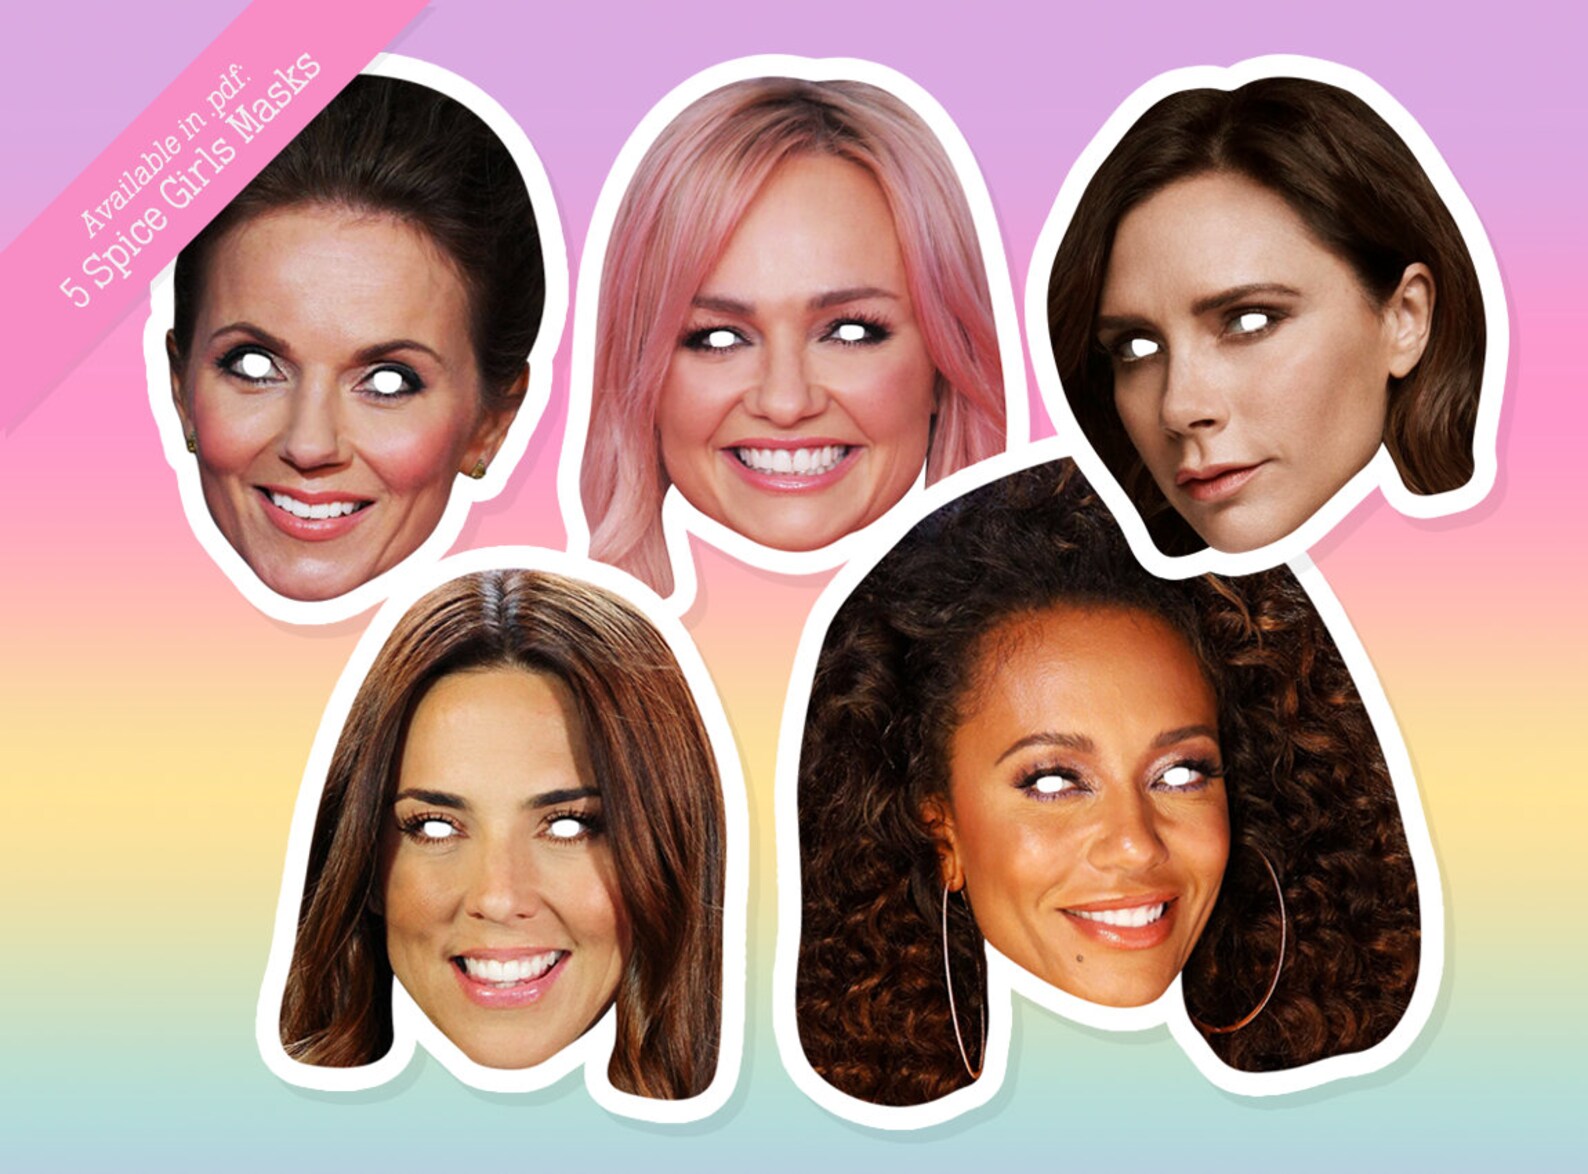 Spice Girls Photo Booth Props Set With 5 Spice Girls Masks Etsy